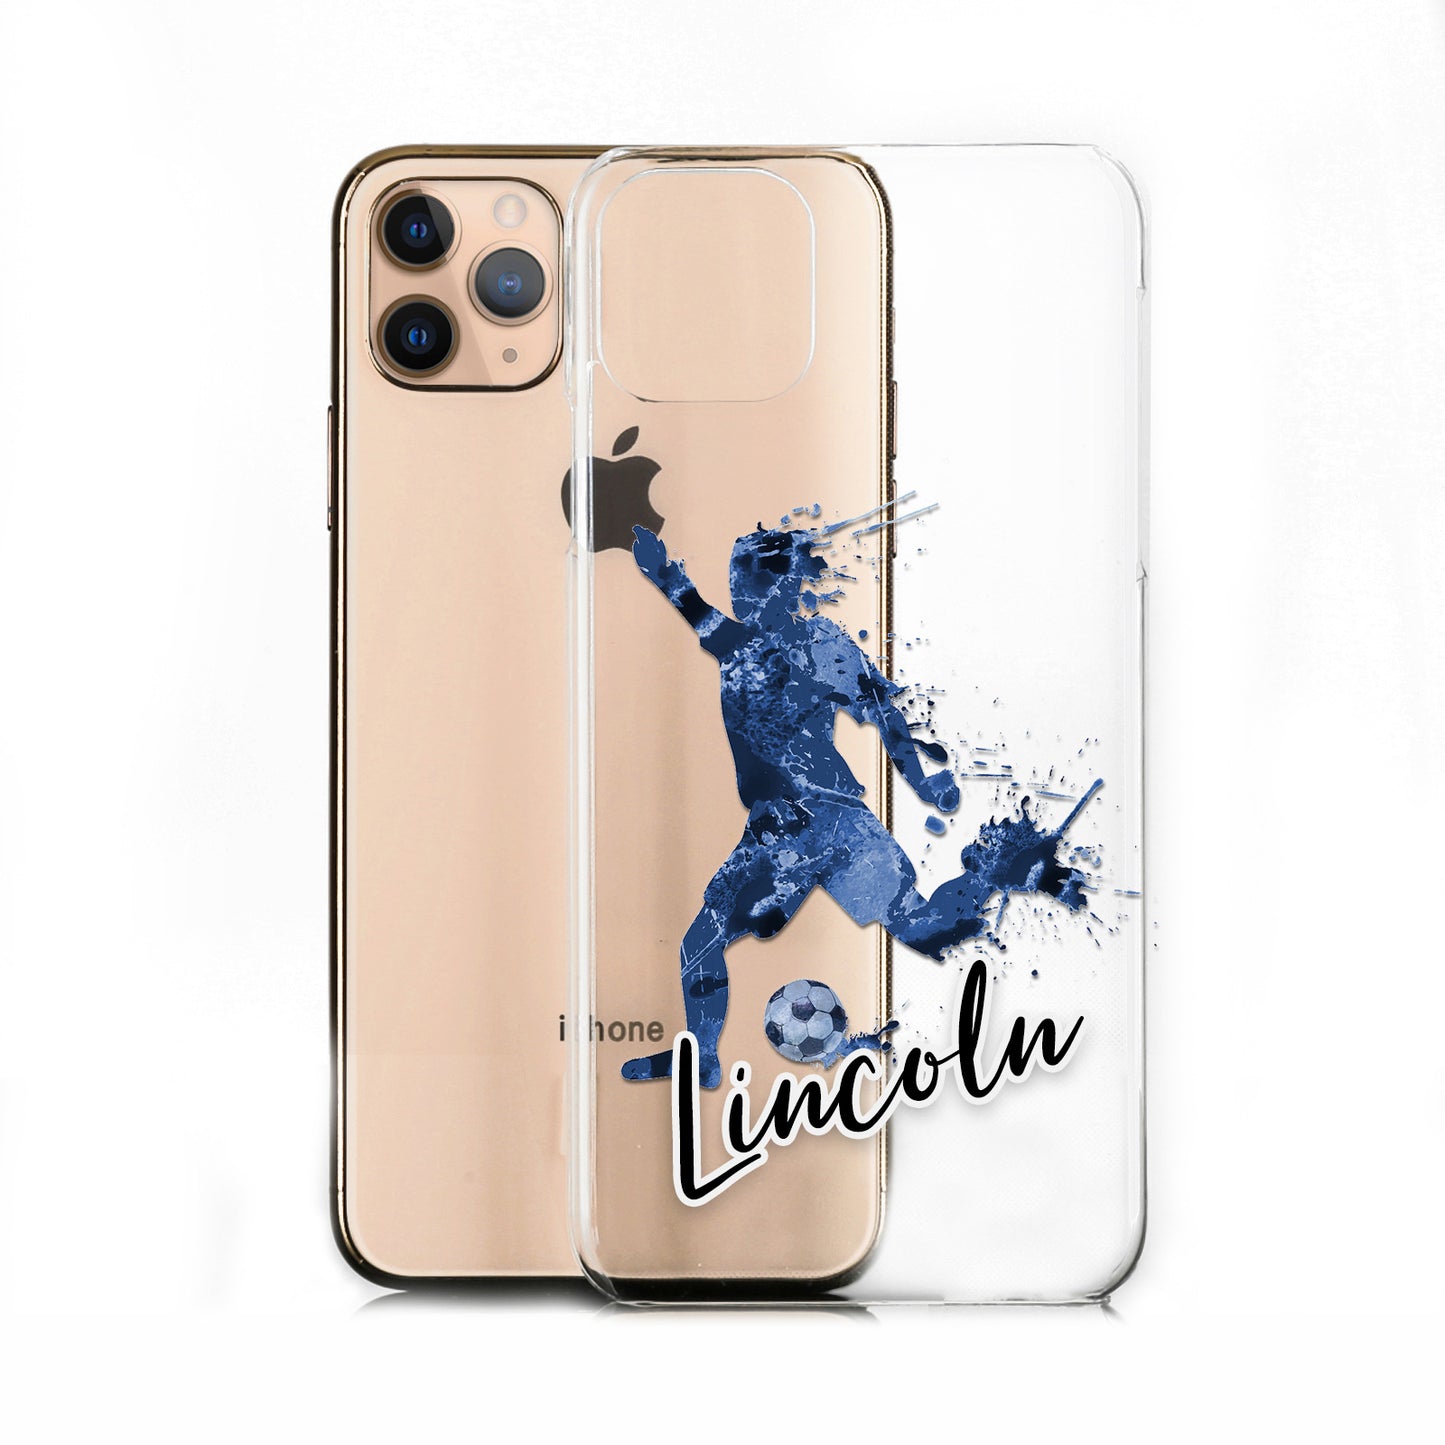 Personalised Apple iPhone Hard Case - Vivid Blue Football Star with White Outlined Text